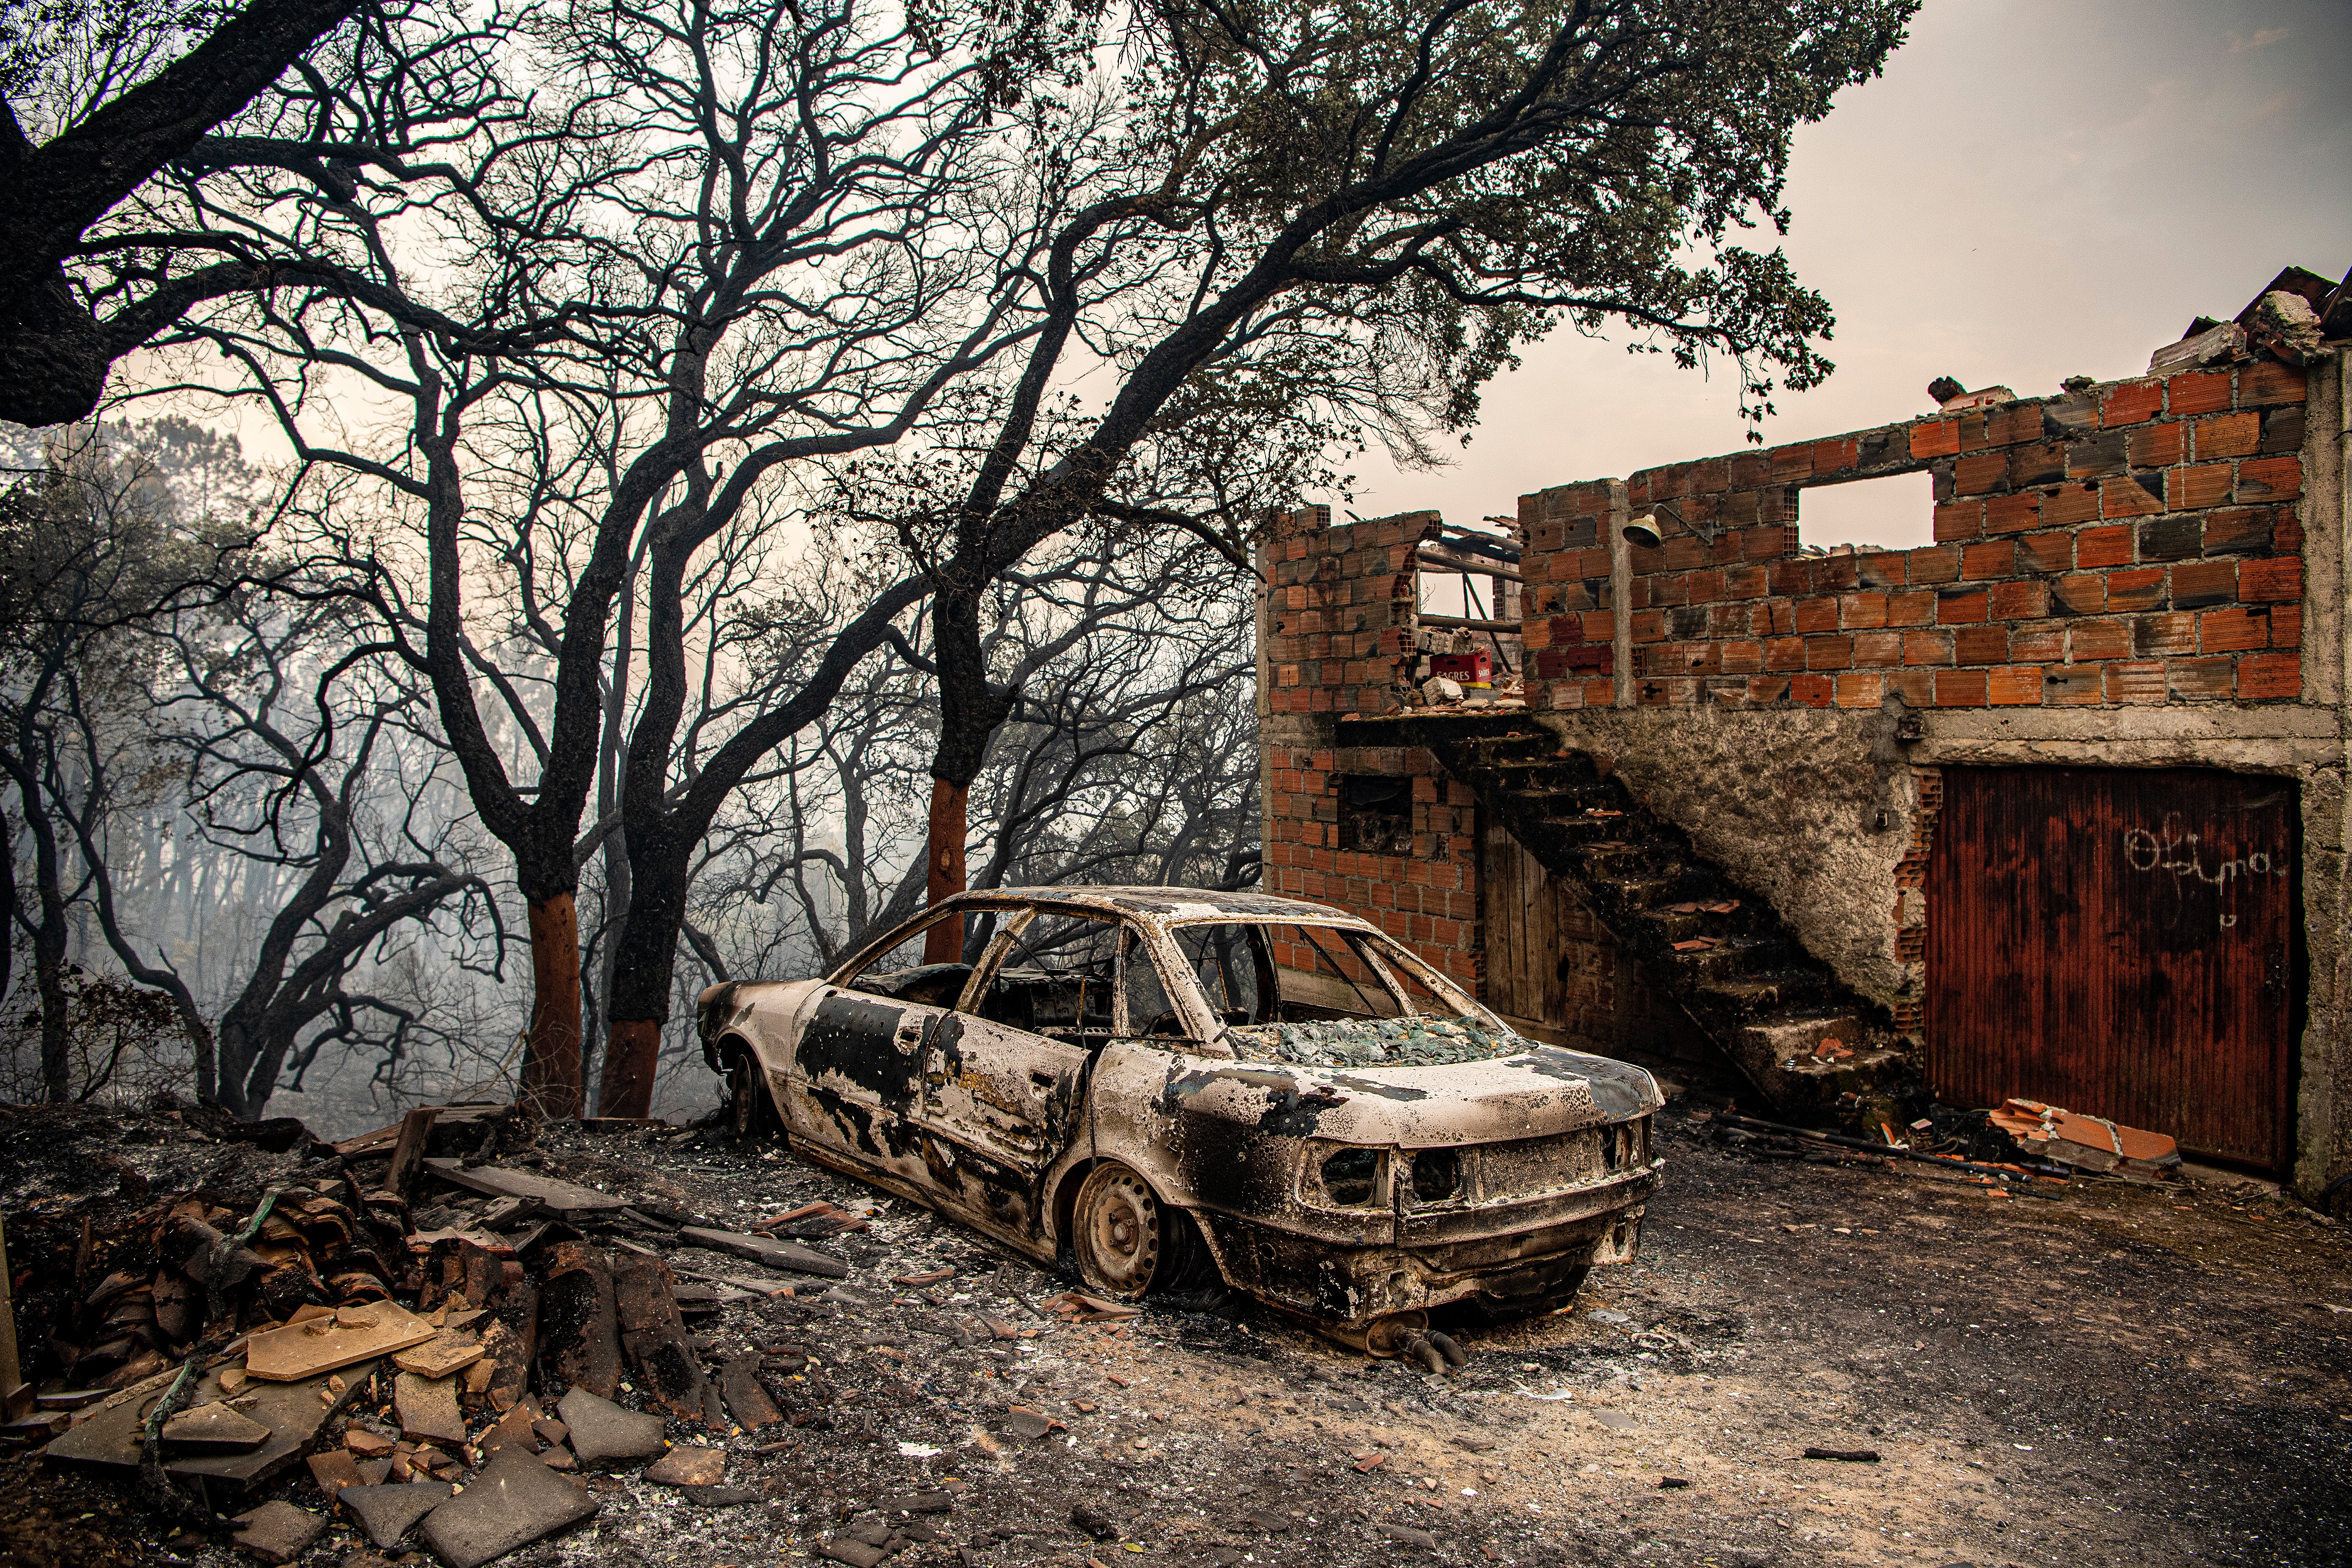 This photograph shows a car and burnt house at Ansiao in Pombal, Portugal